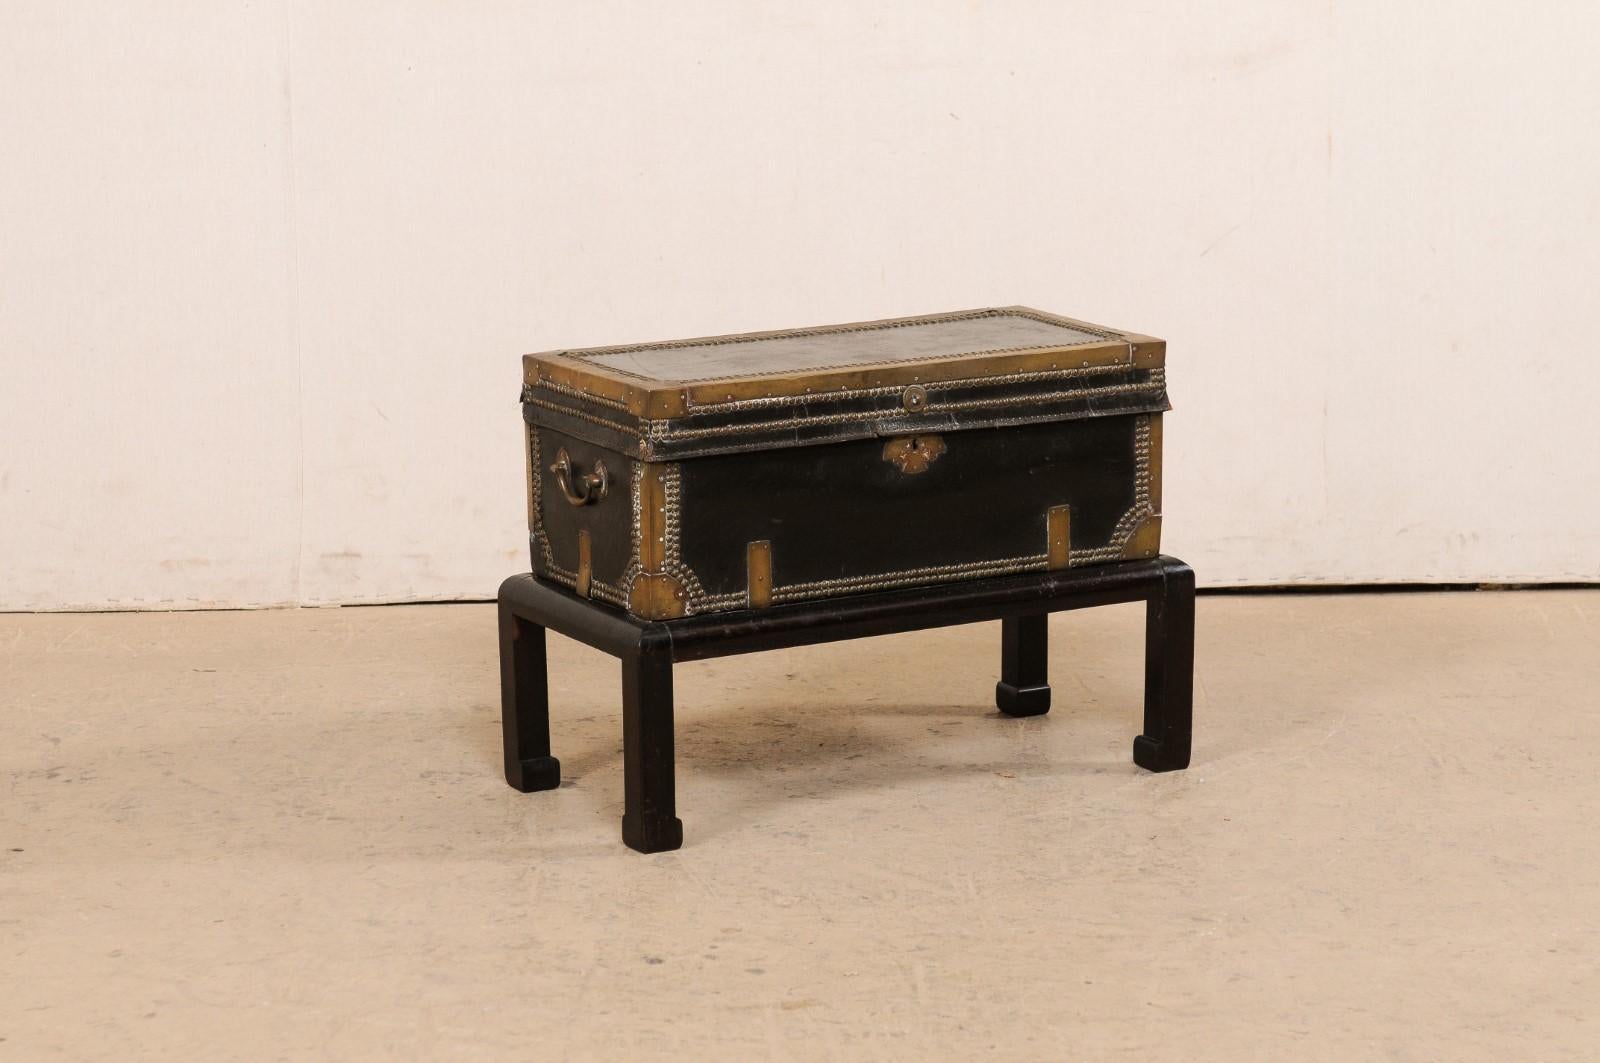 A Chinese leather-wrapped wooden trunk with brass and nail-head accents from the 19th century, and raised on a vintage wood stand. This coffer from China has a rectangular-shape body, decorated with brass banding nicely outlining and defining the